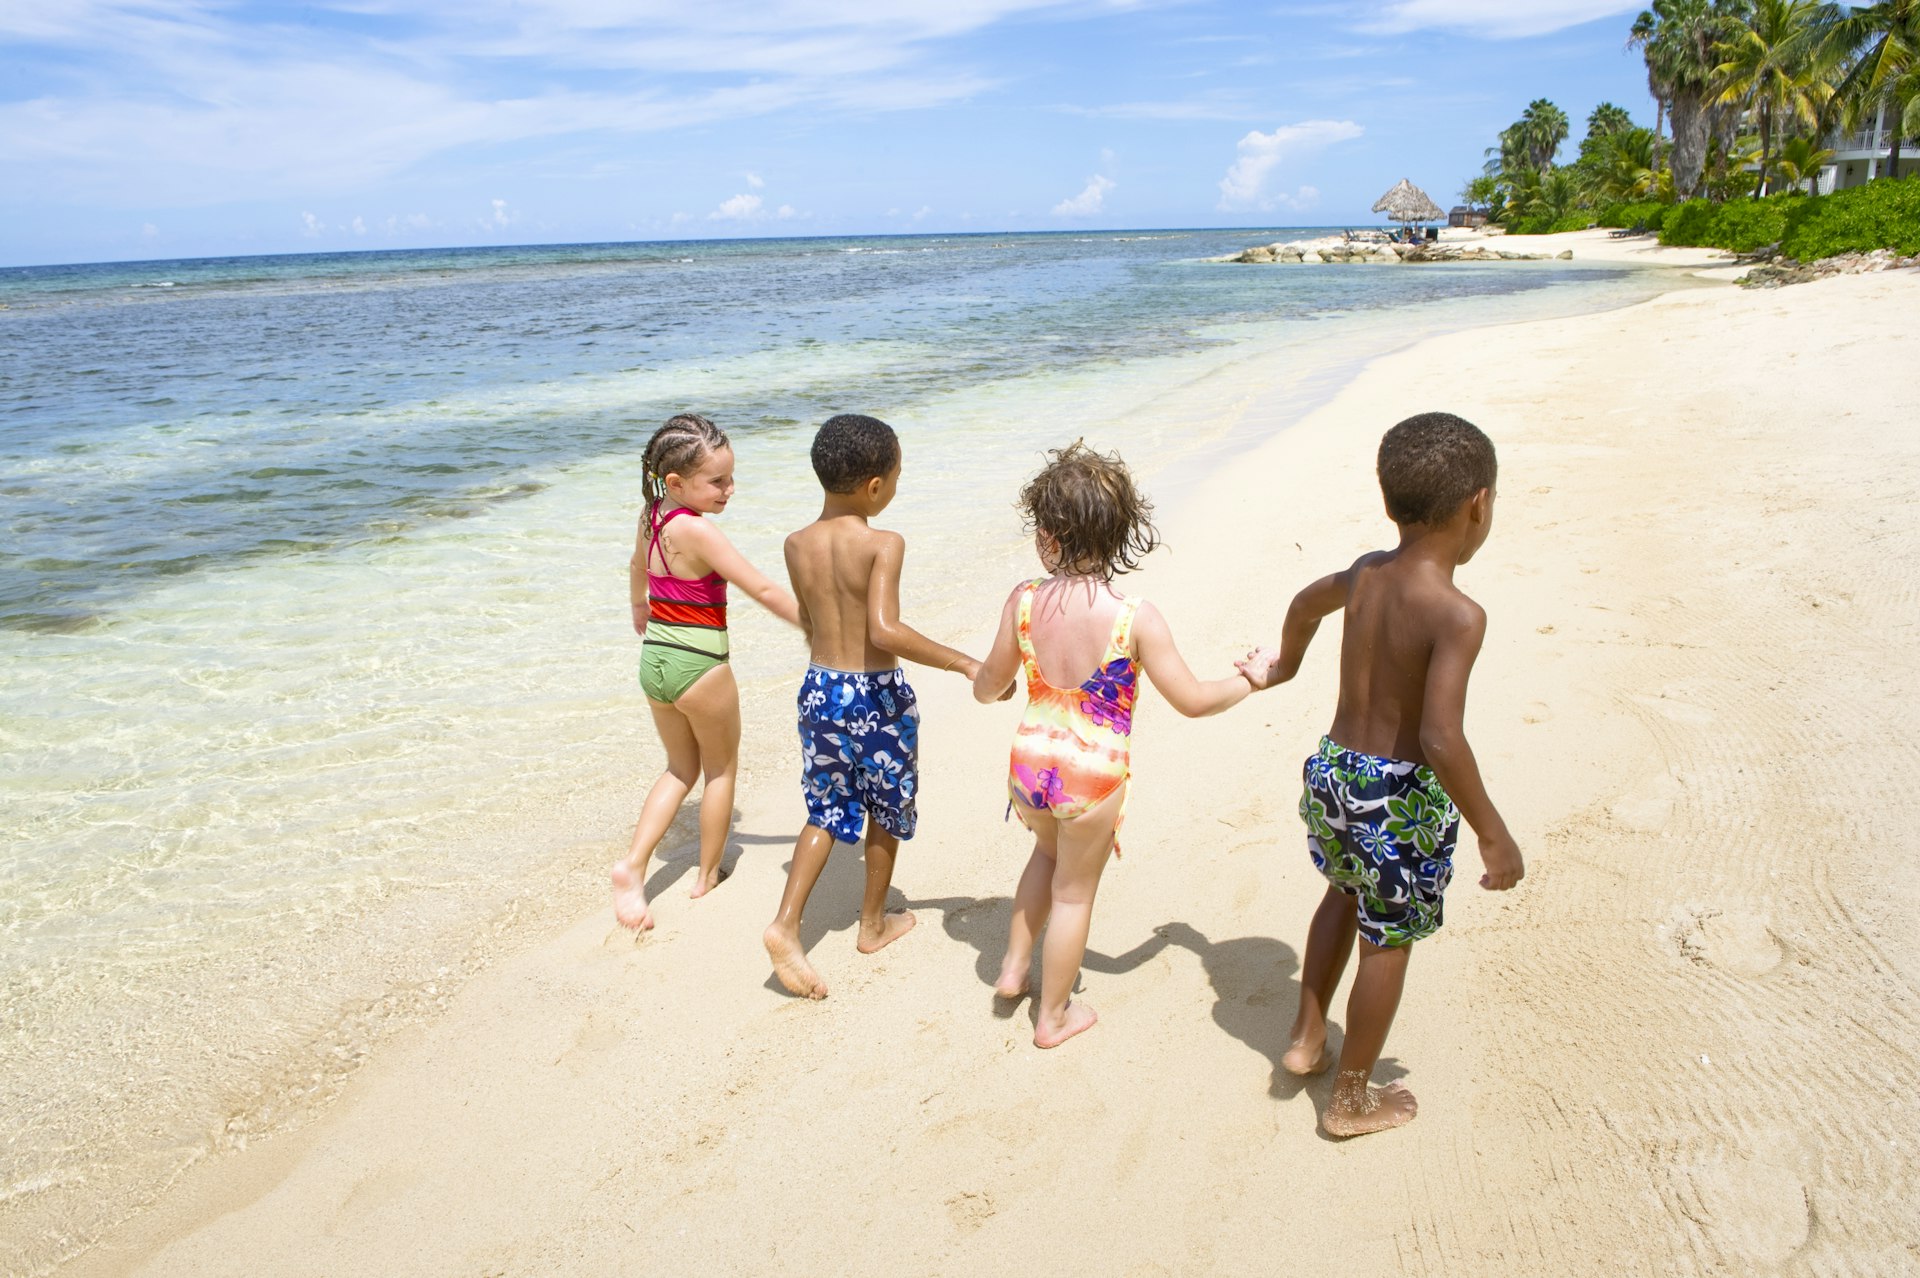 Four young children hold hands as they walk along a sandy beach together